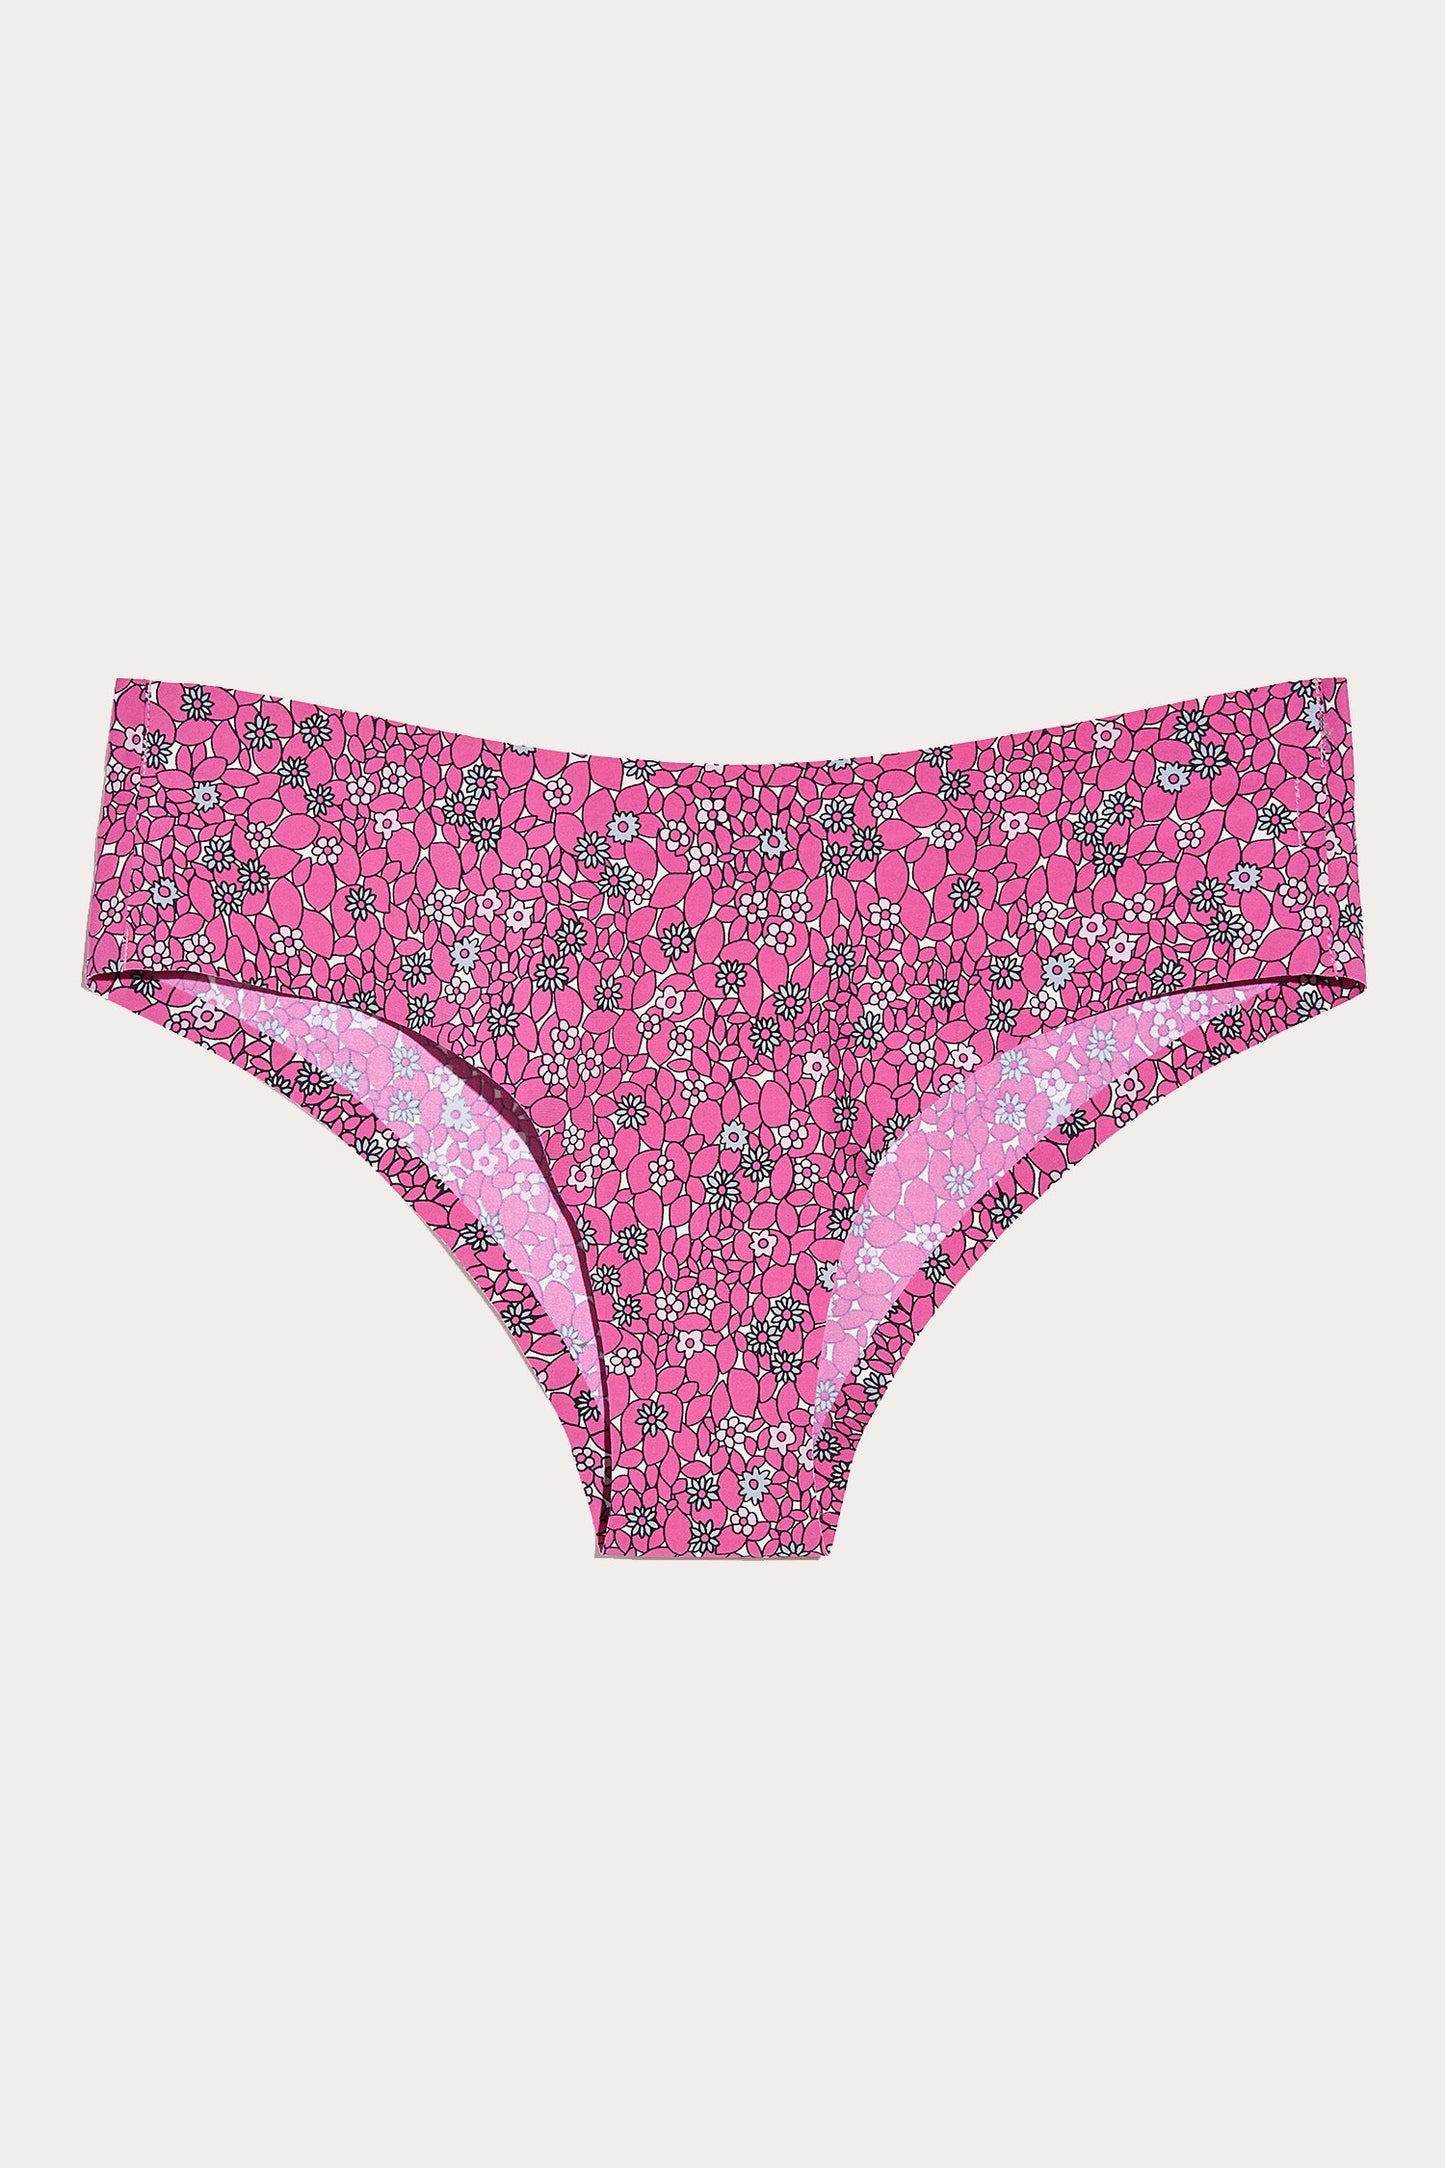 this Hedge Essential Cheeky inspired by the Arts and Crafts movement and Scandinavian designs from the sixties